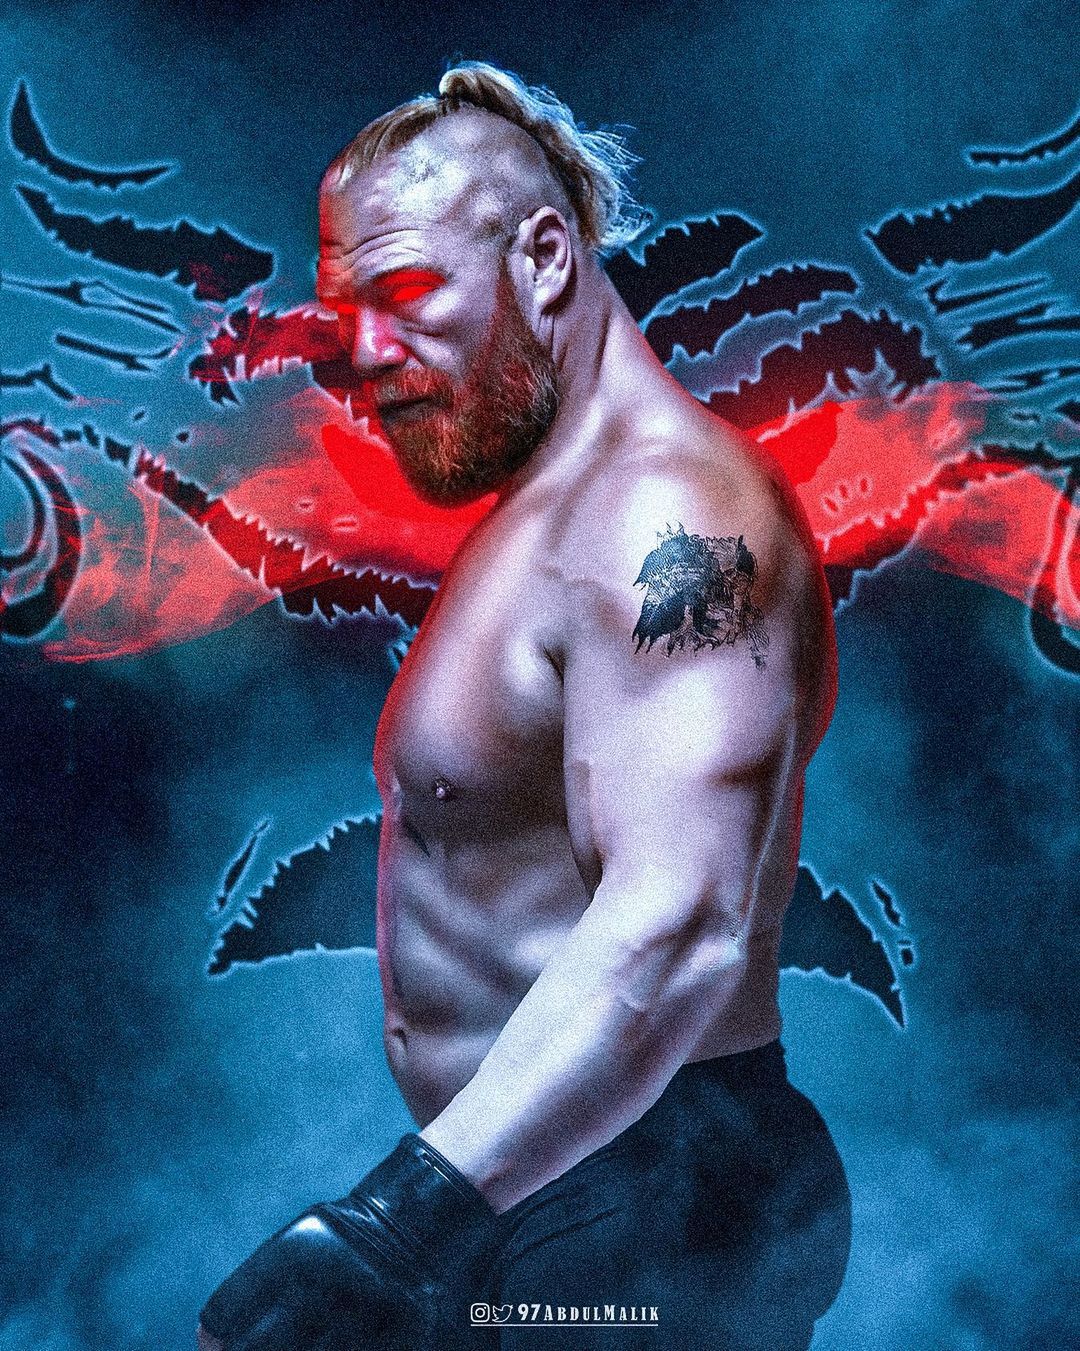 Abdulmalik. عبدالملك‎ on Instagram: BROCK LESNAR 2.0 Really loved this new look of Brock and decided to. Brock lesnar, Wwe picture, Wwe superstar roman reigns